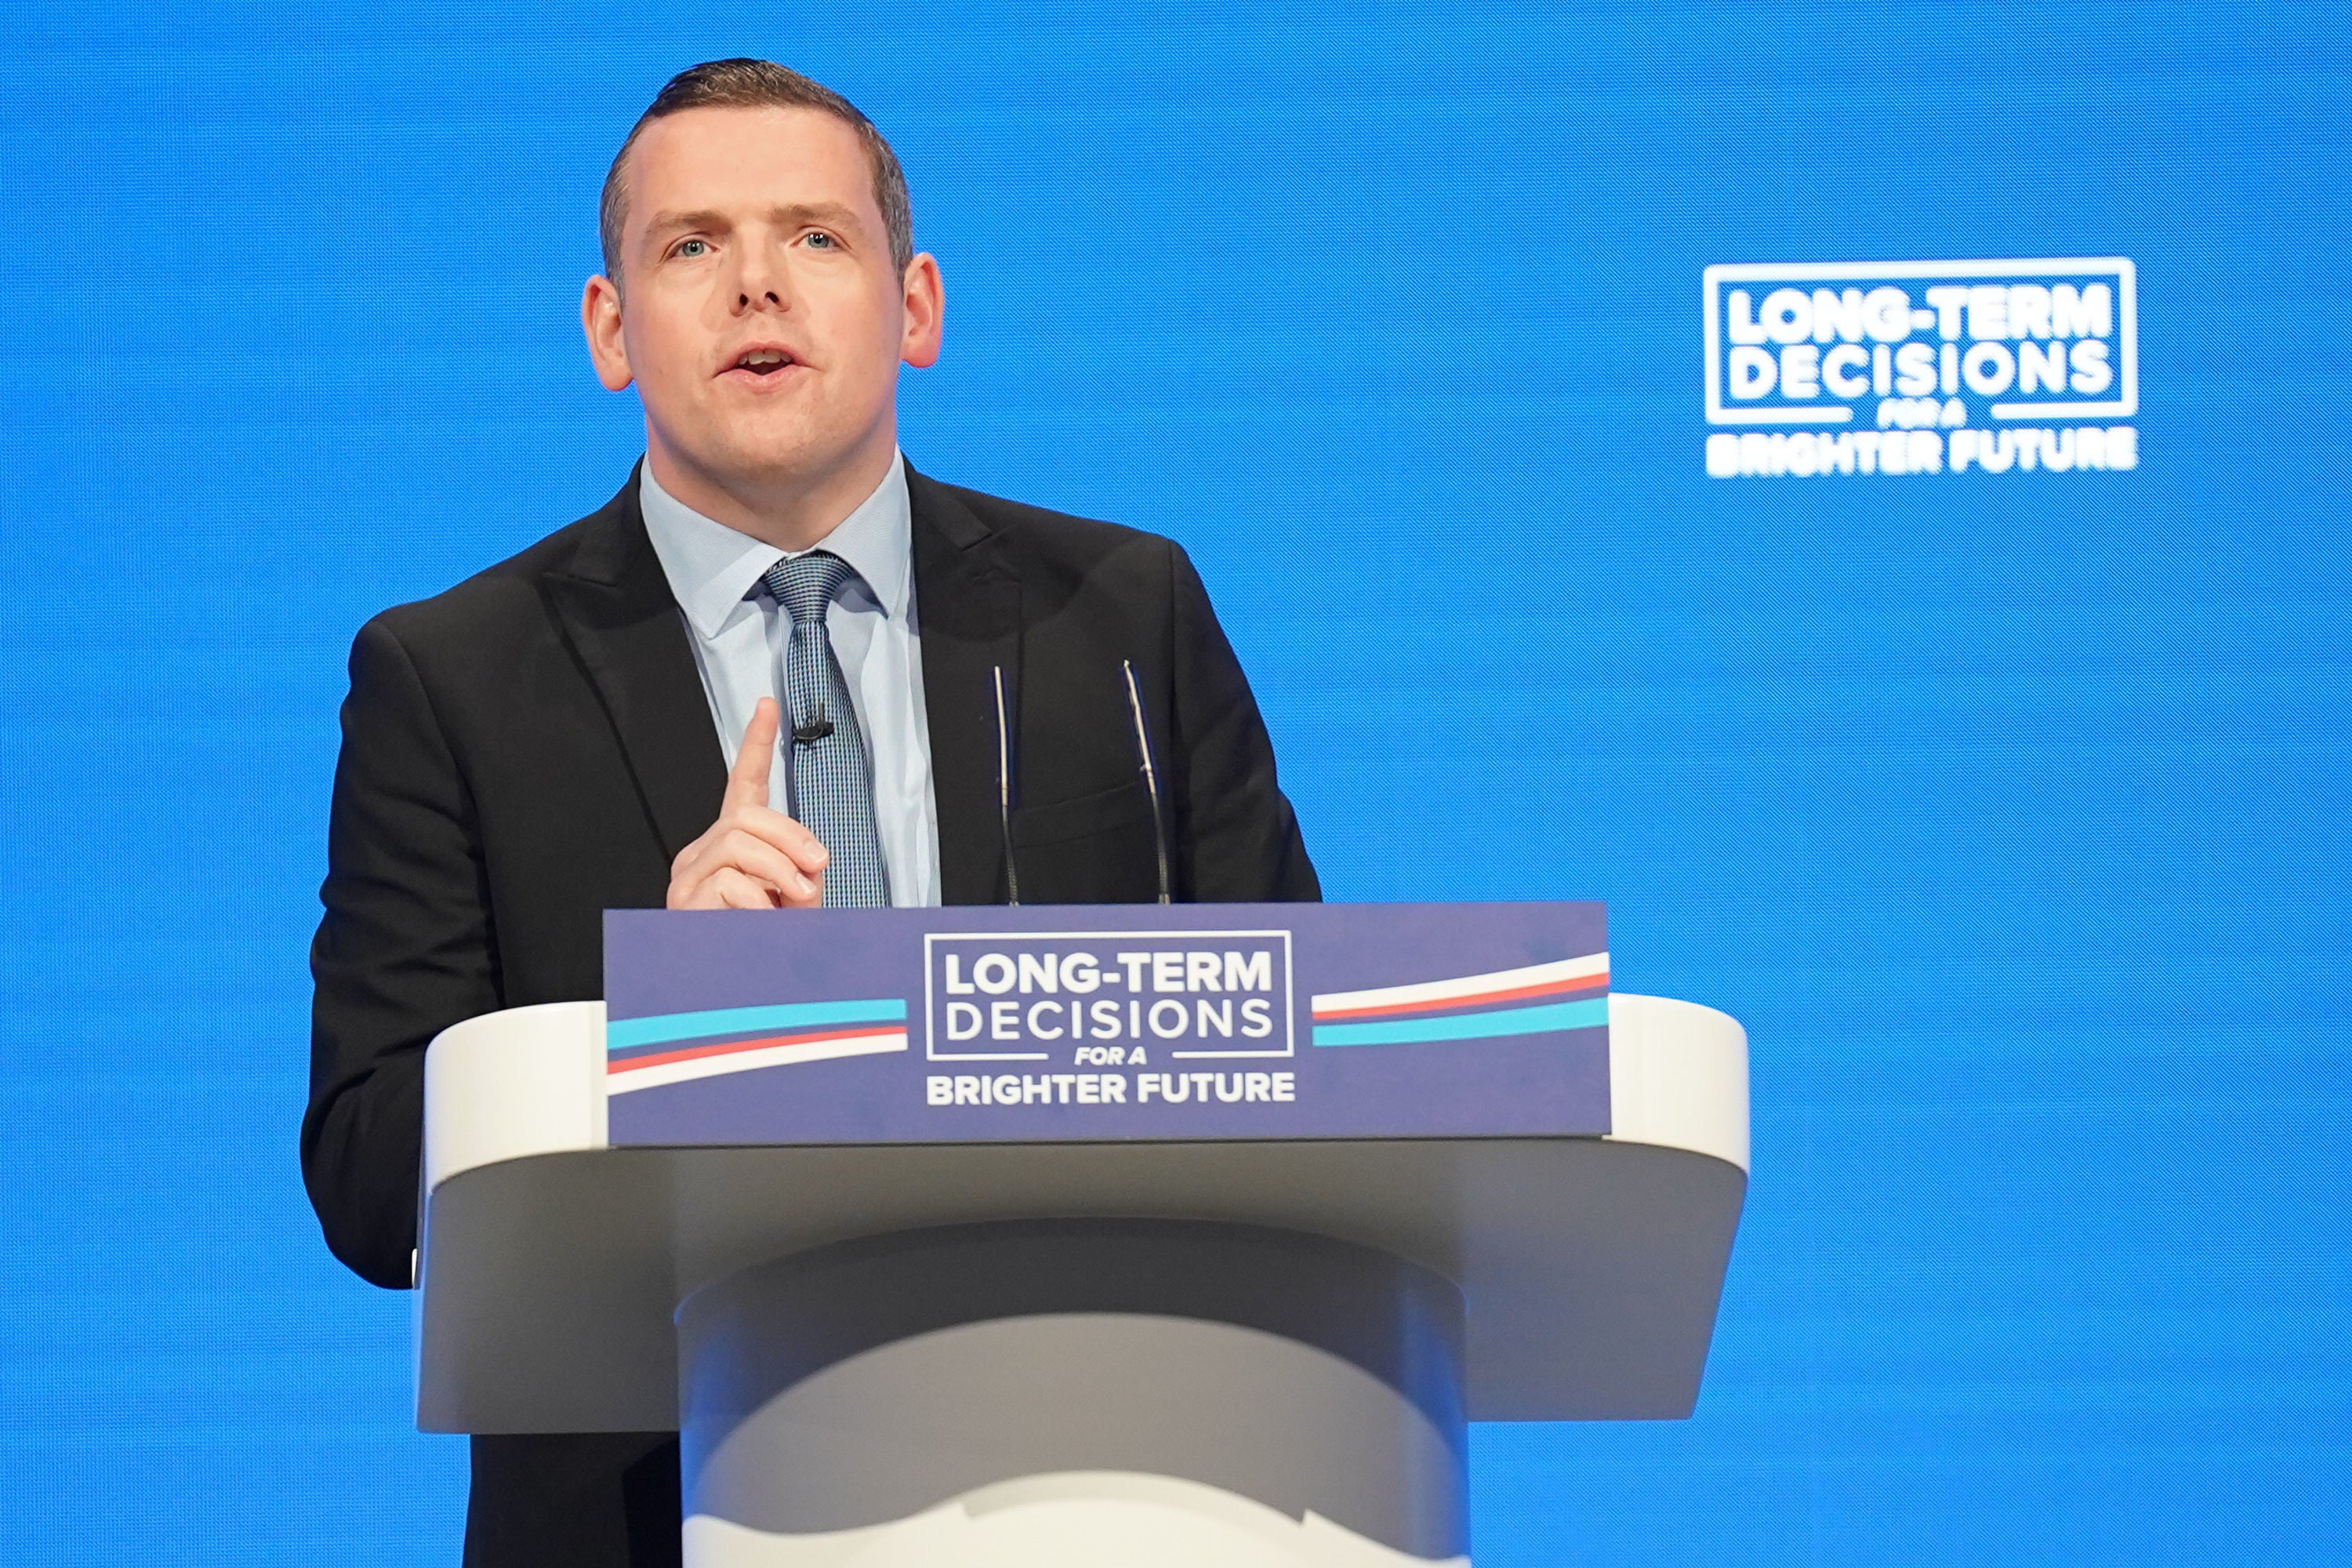 Scottish Conservative leader Douglas Ross will leave Westminster at the next election